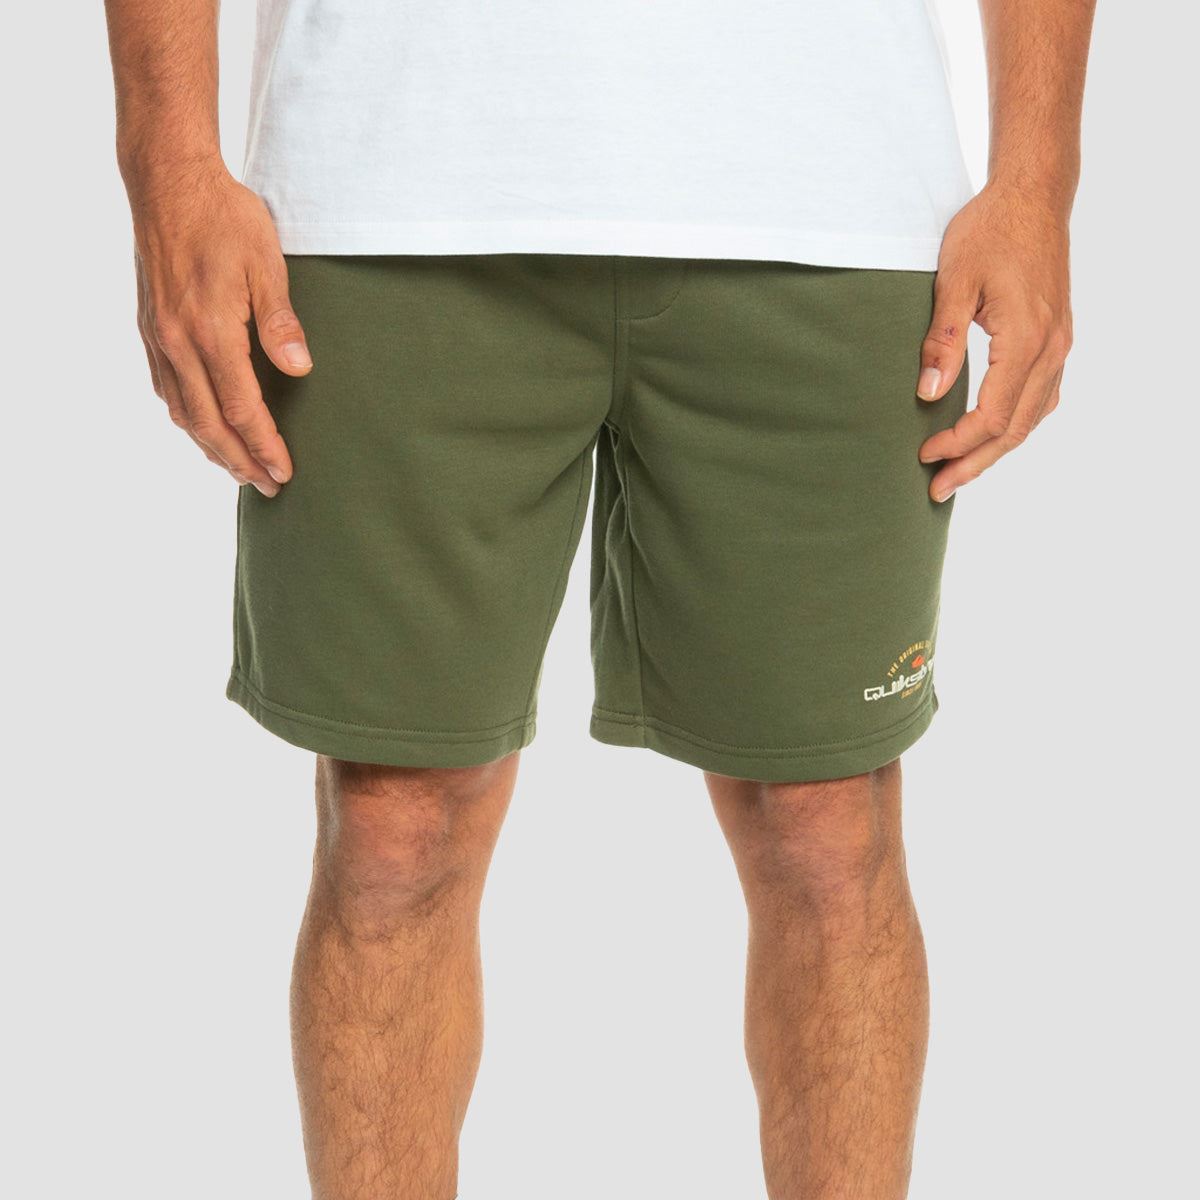 Four Shorts Clover Quiksilver Leaf Local Sweat Surf